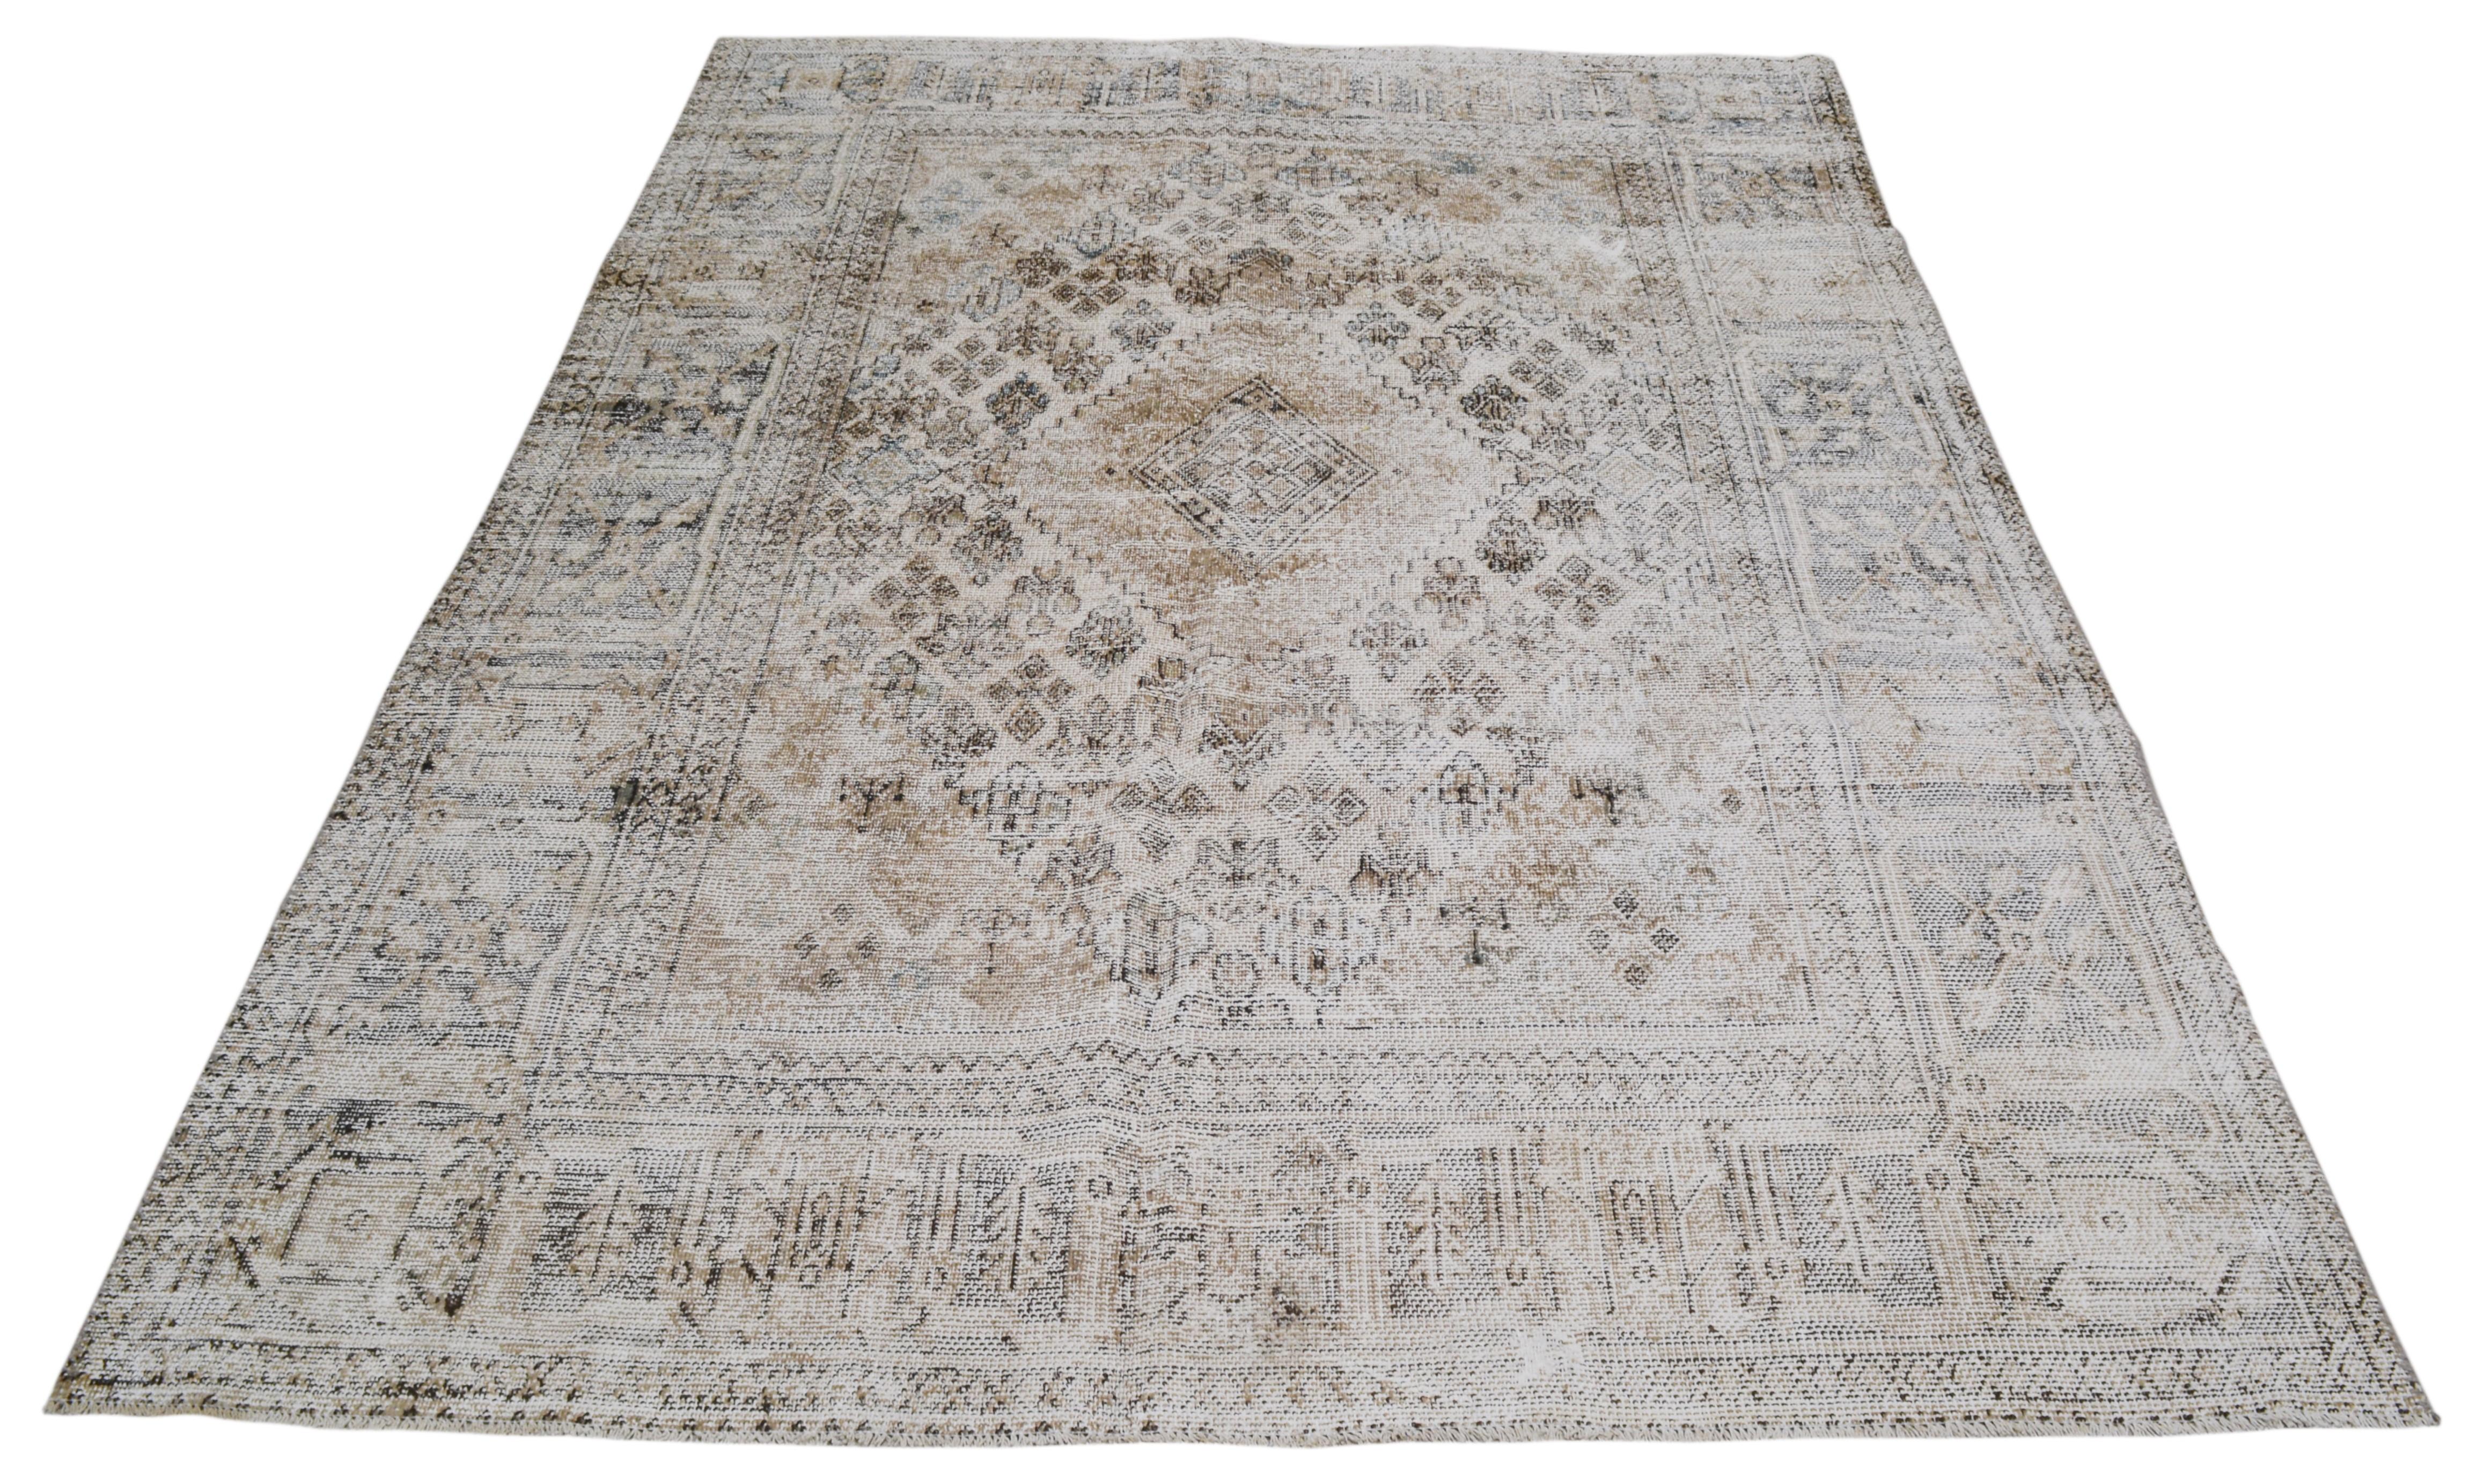 Beautiful heirloom-quality antique Tabriz area rug with neutral tones and an intricate geometric pattern. 
Please note that as a vintage item this piece may have imperfections, pattern and/or color variations which is considered normal and only